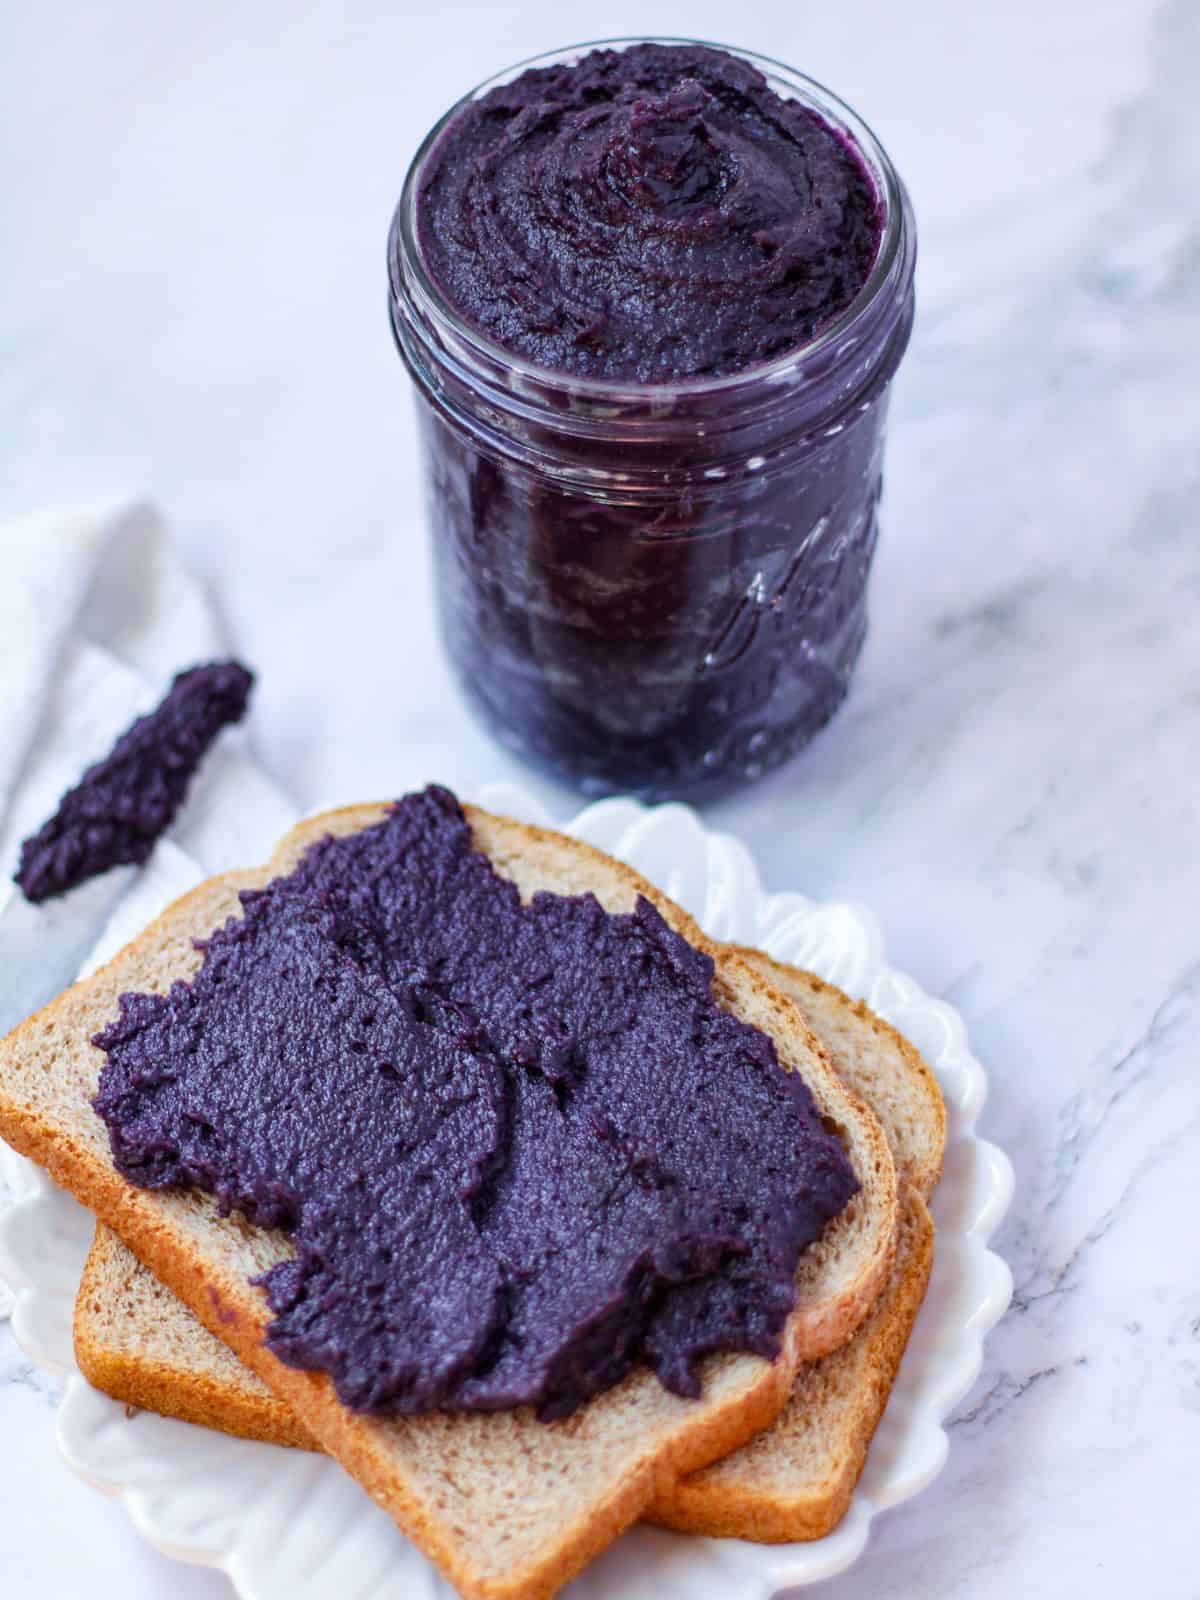 Ube jam in a jar and spread in a slice bread.